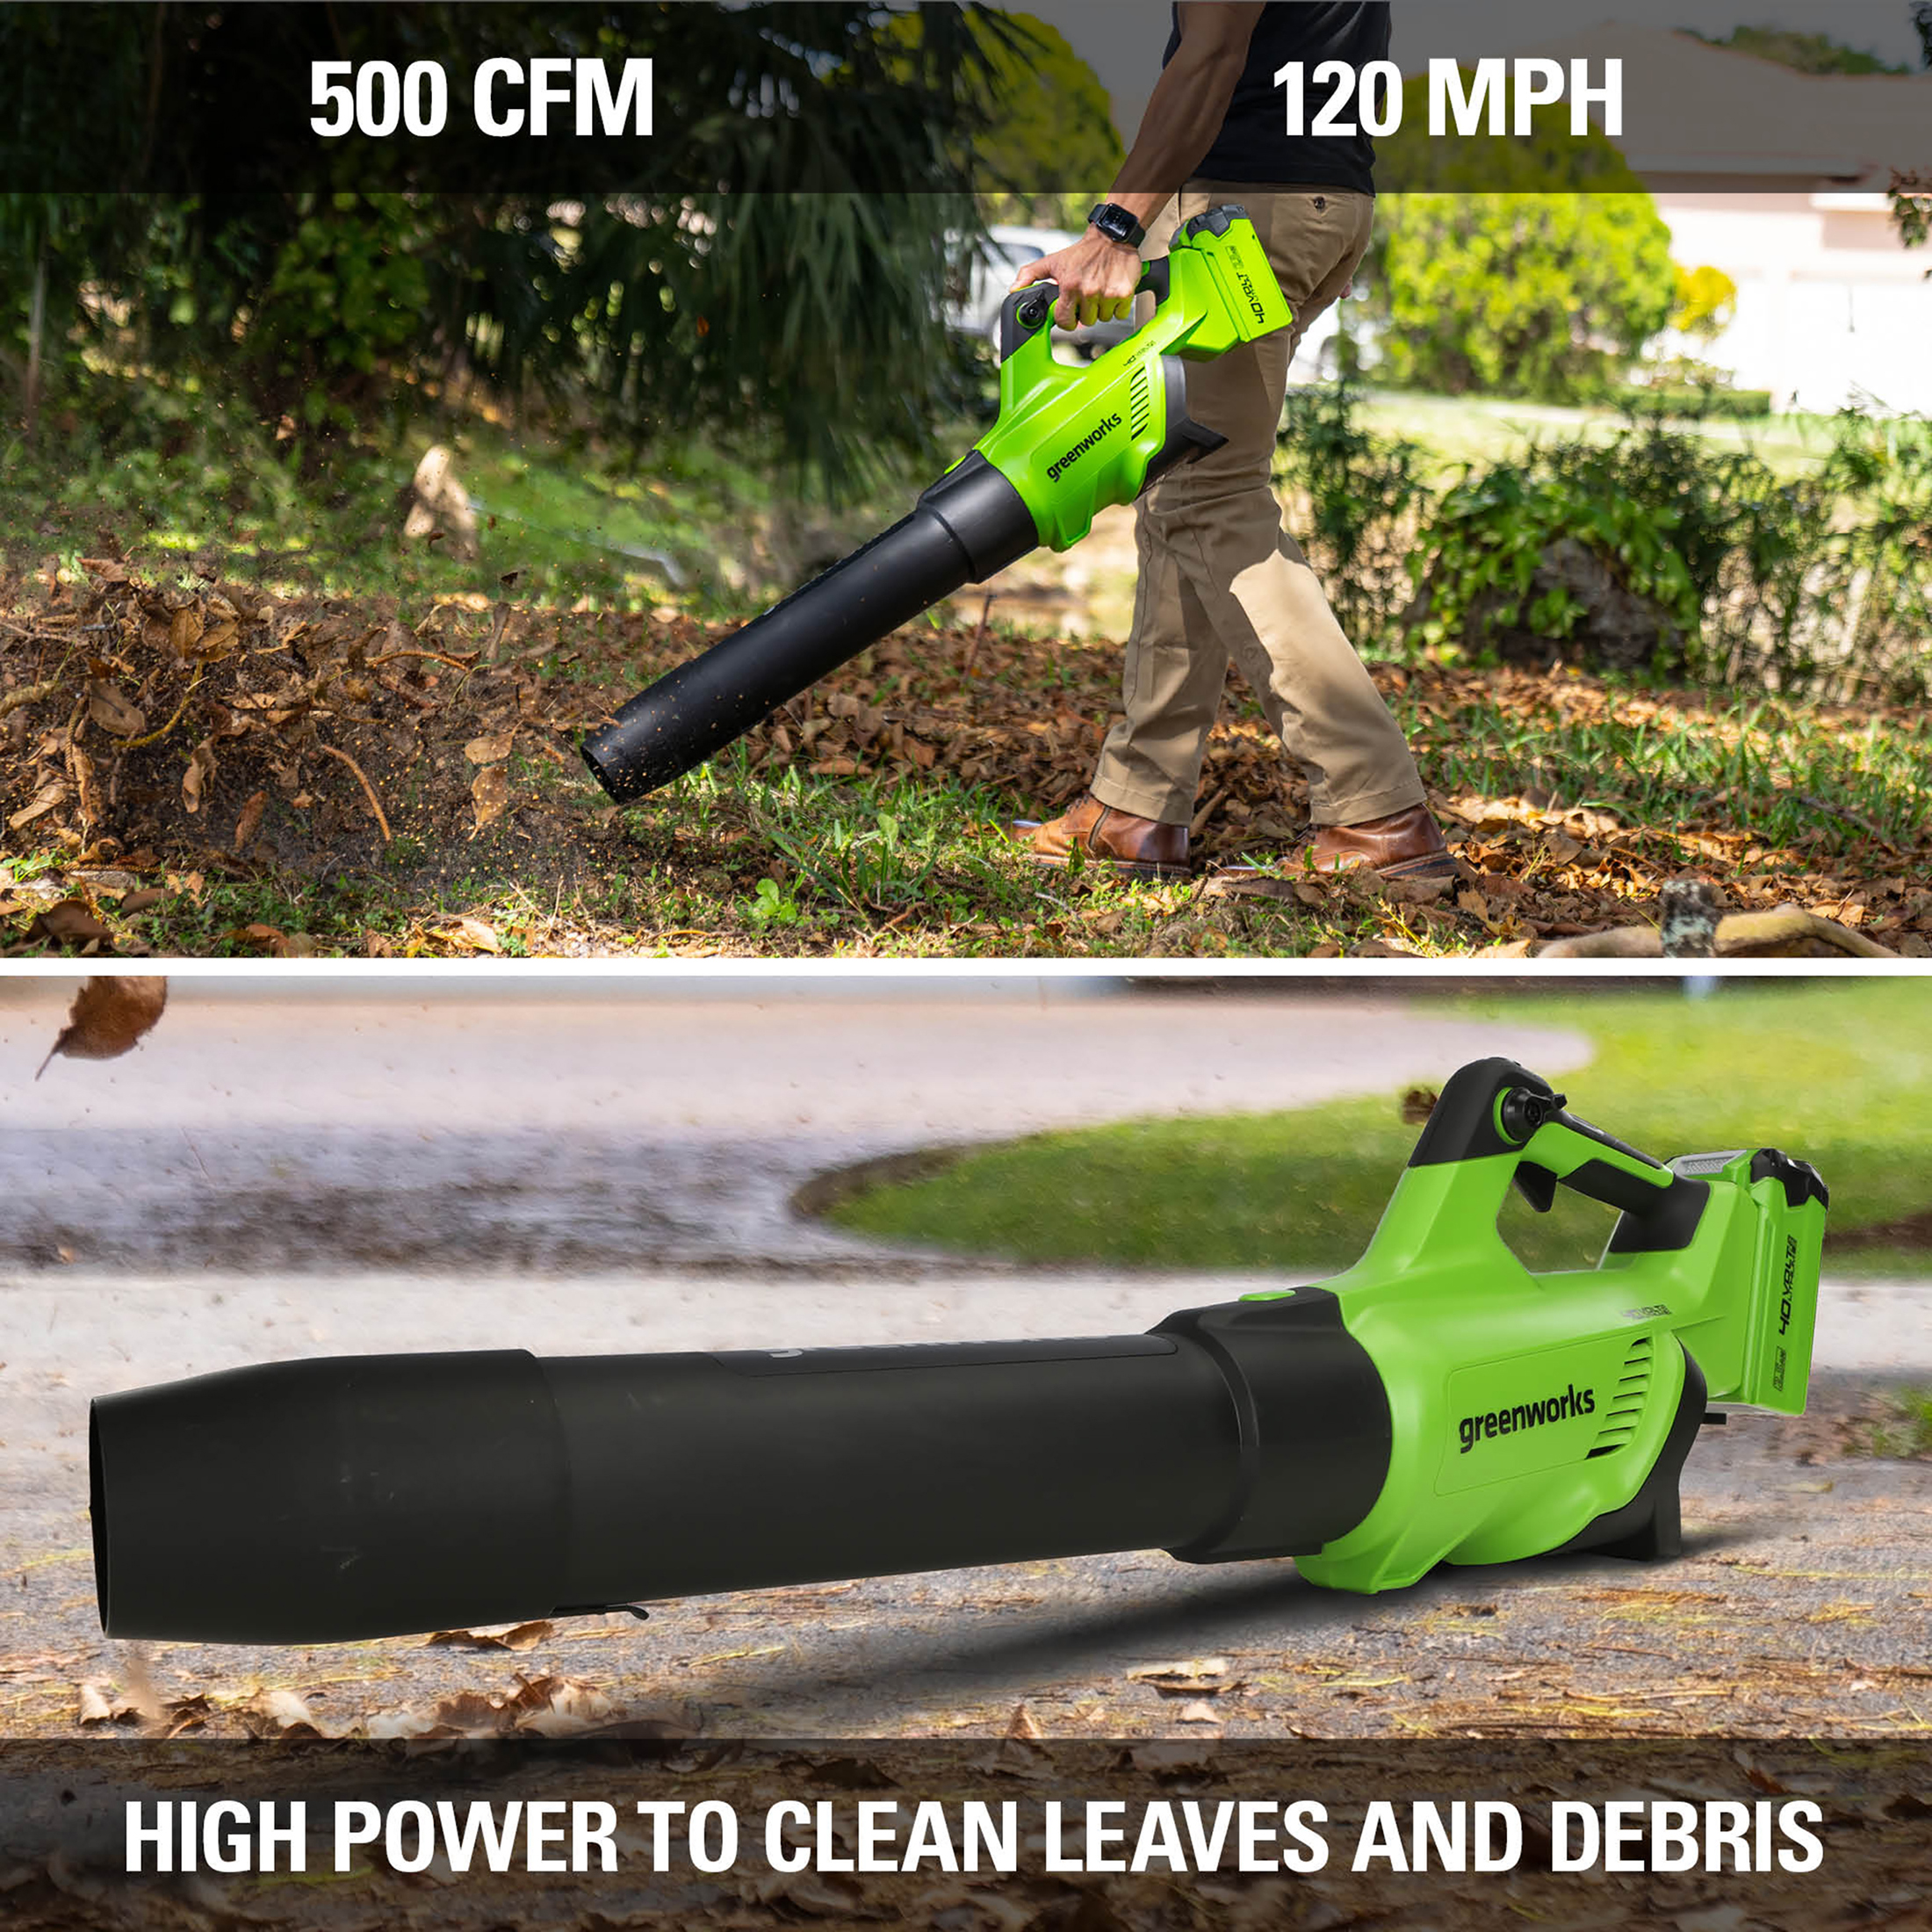 Greenworks 40V (120 MPH / 500 CFM) Cordless Axial Blower with 2.5Ah Battery and Charger， 2416302AZ